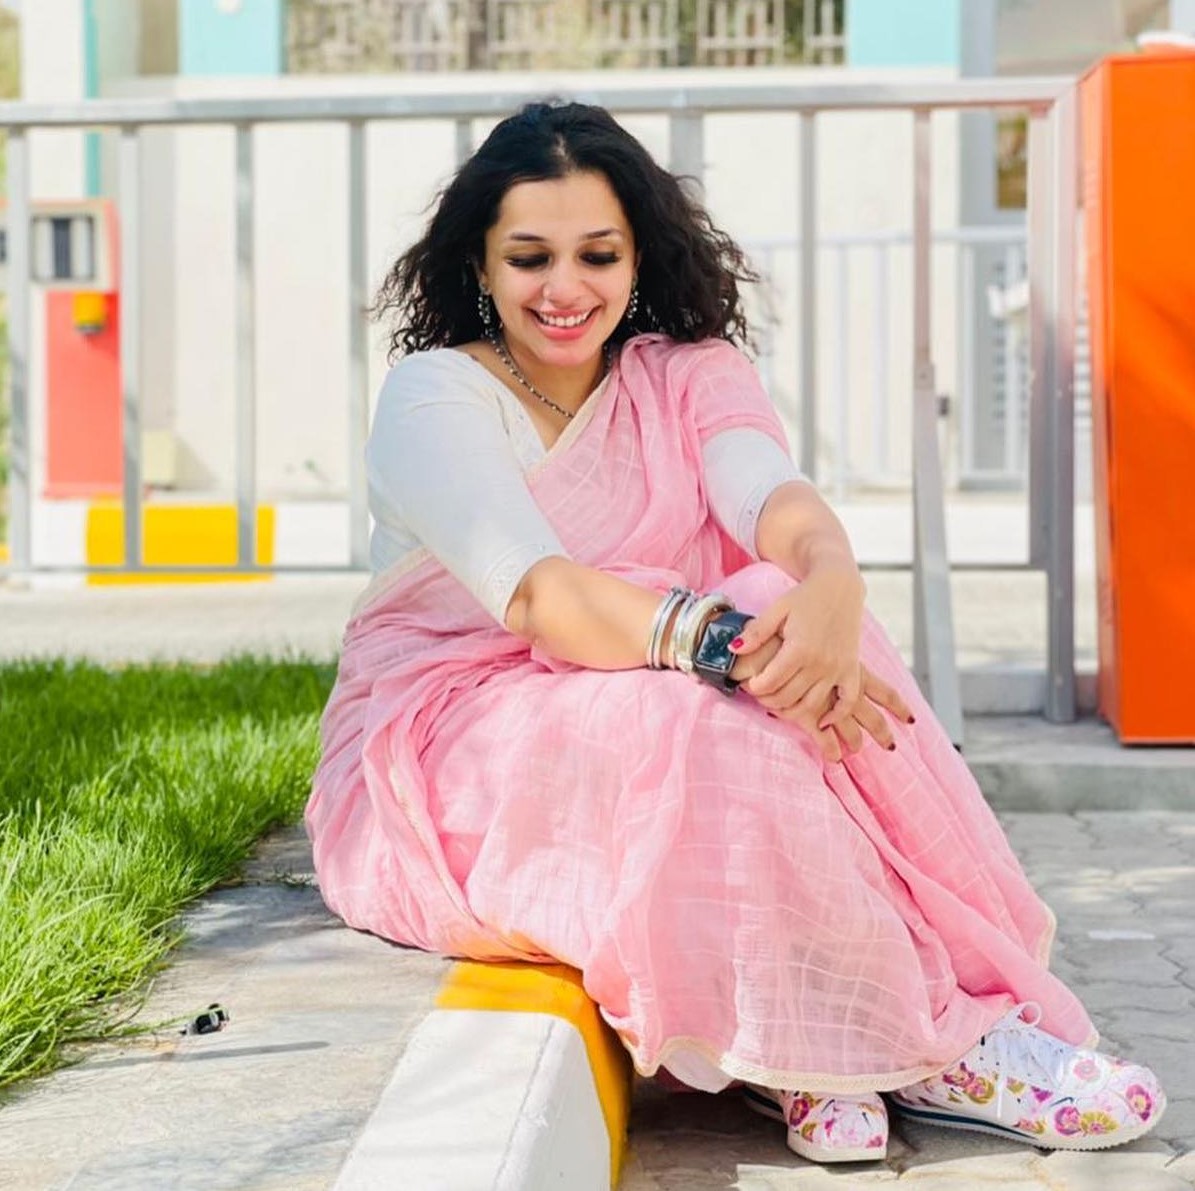 Ann Augustine Look Fabulous In Pink Cotton Saree With White Sneakers